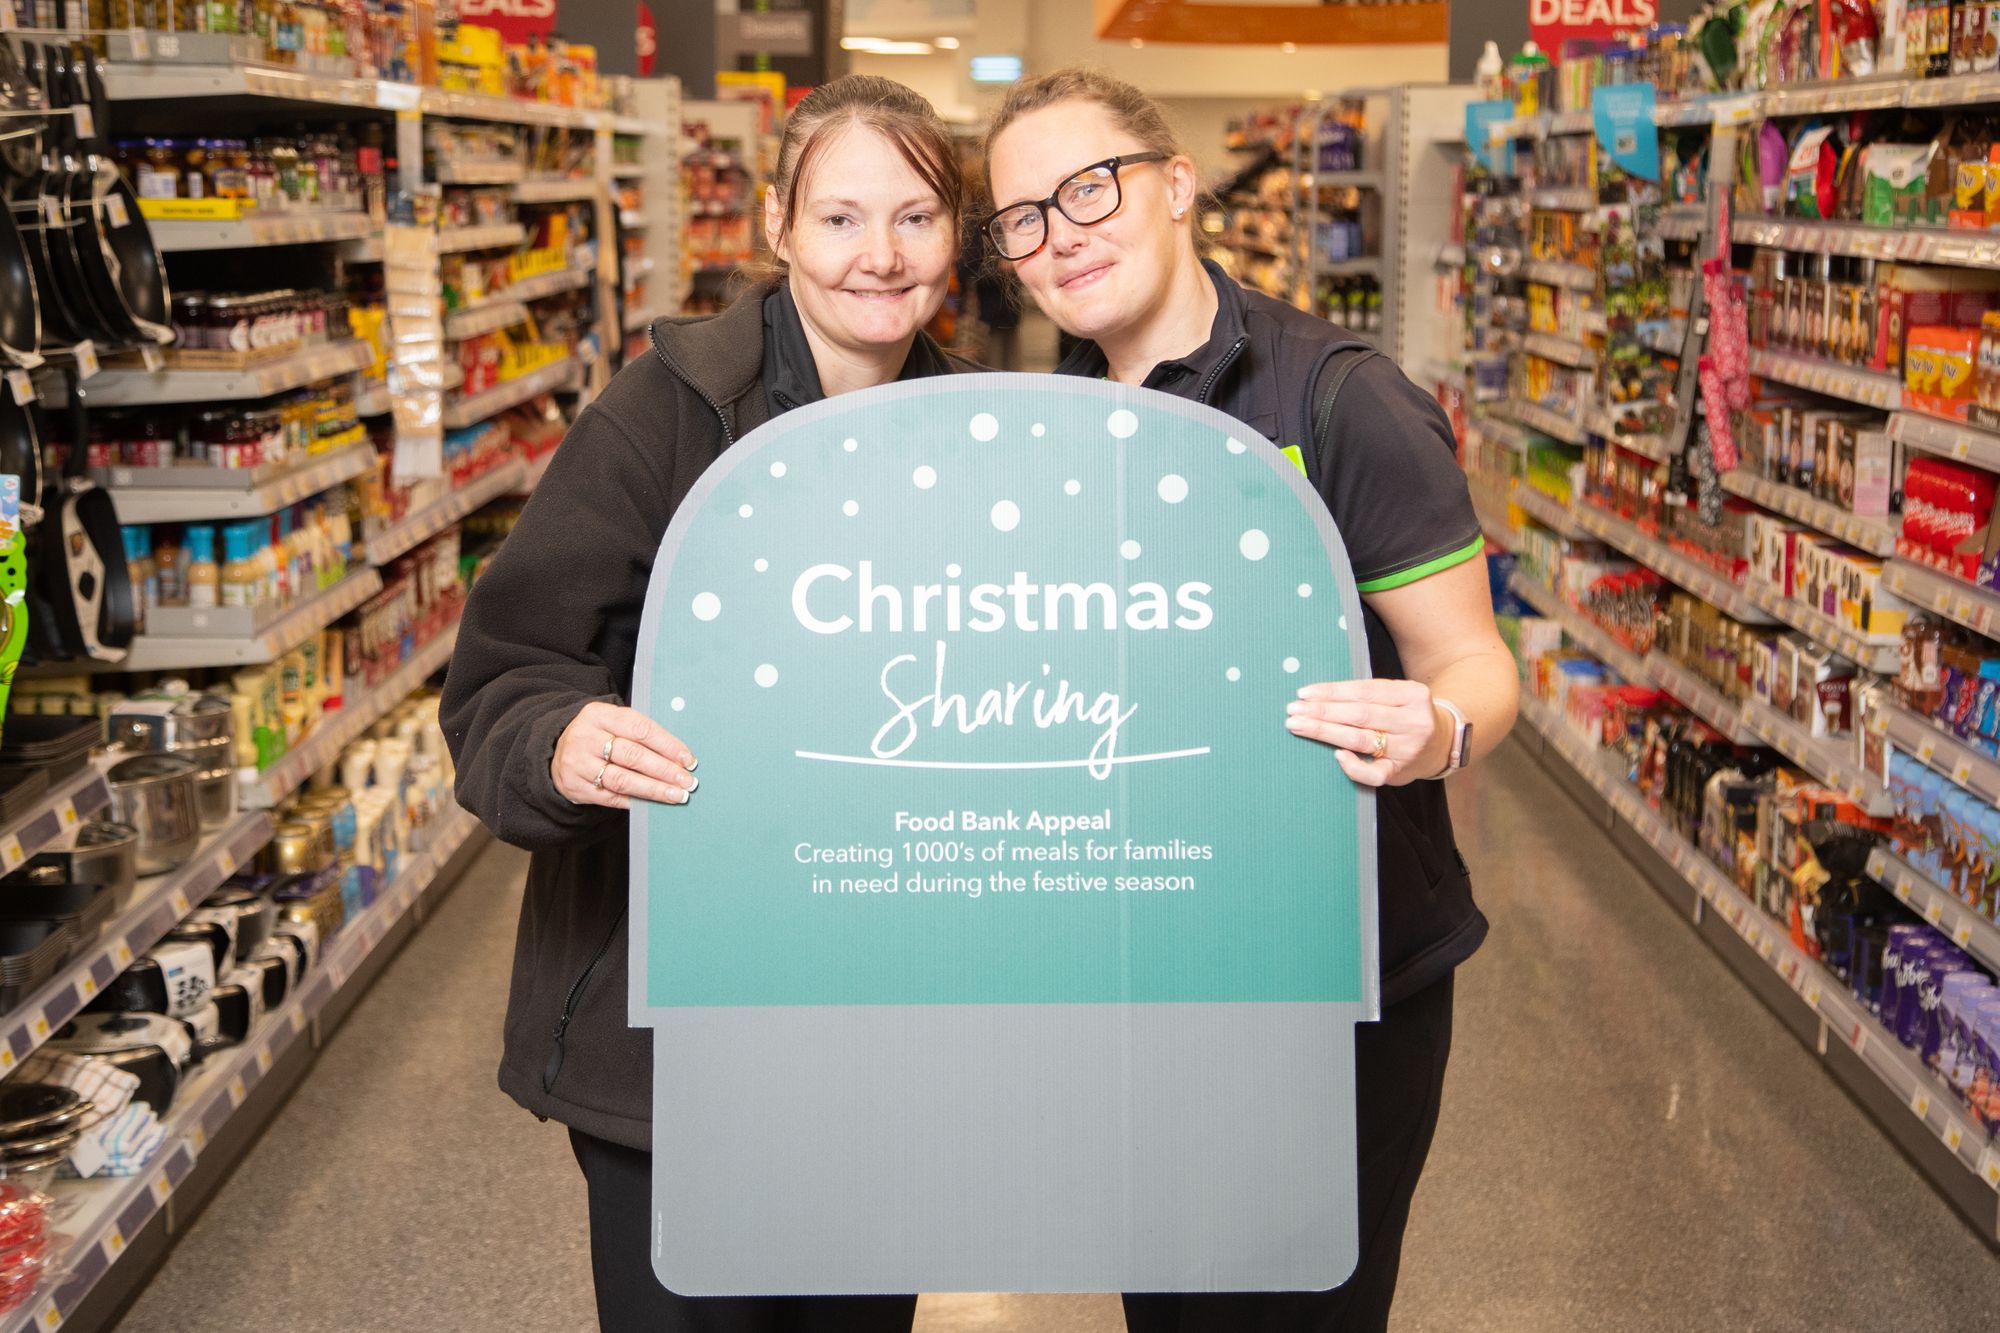 Central England Co-op urges people to donate a festive treat to help people in need